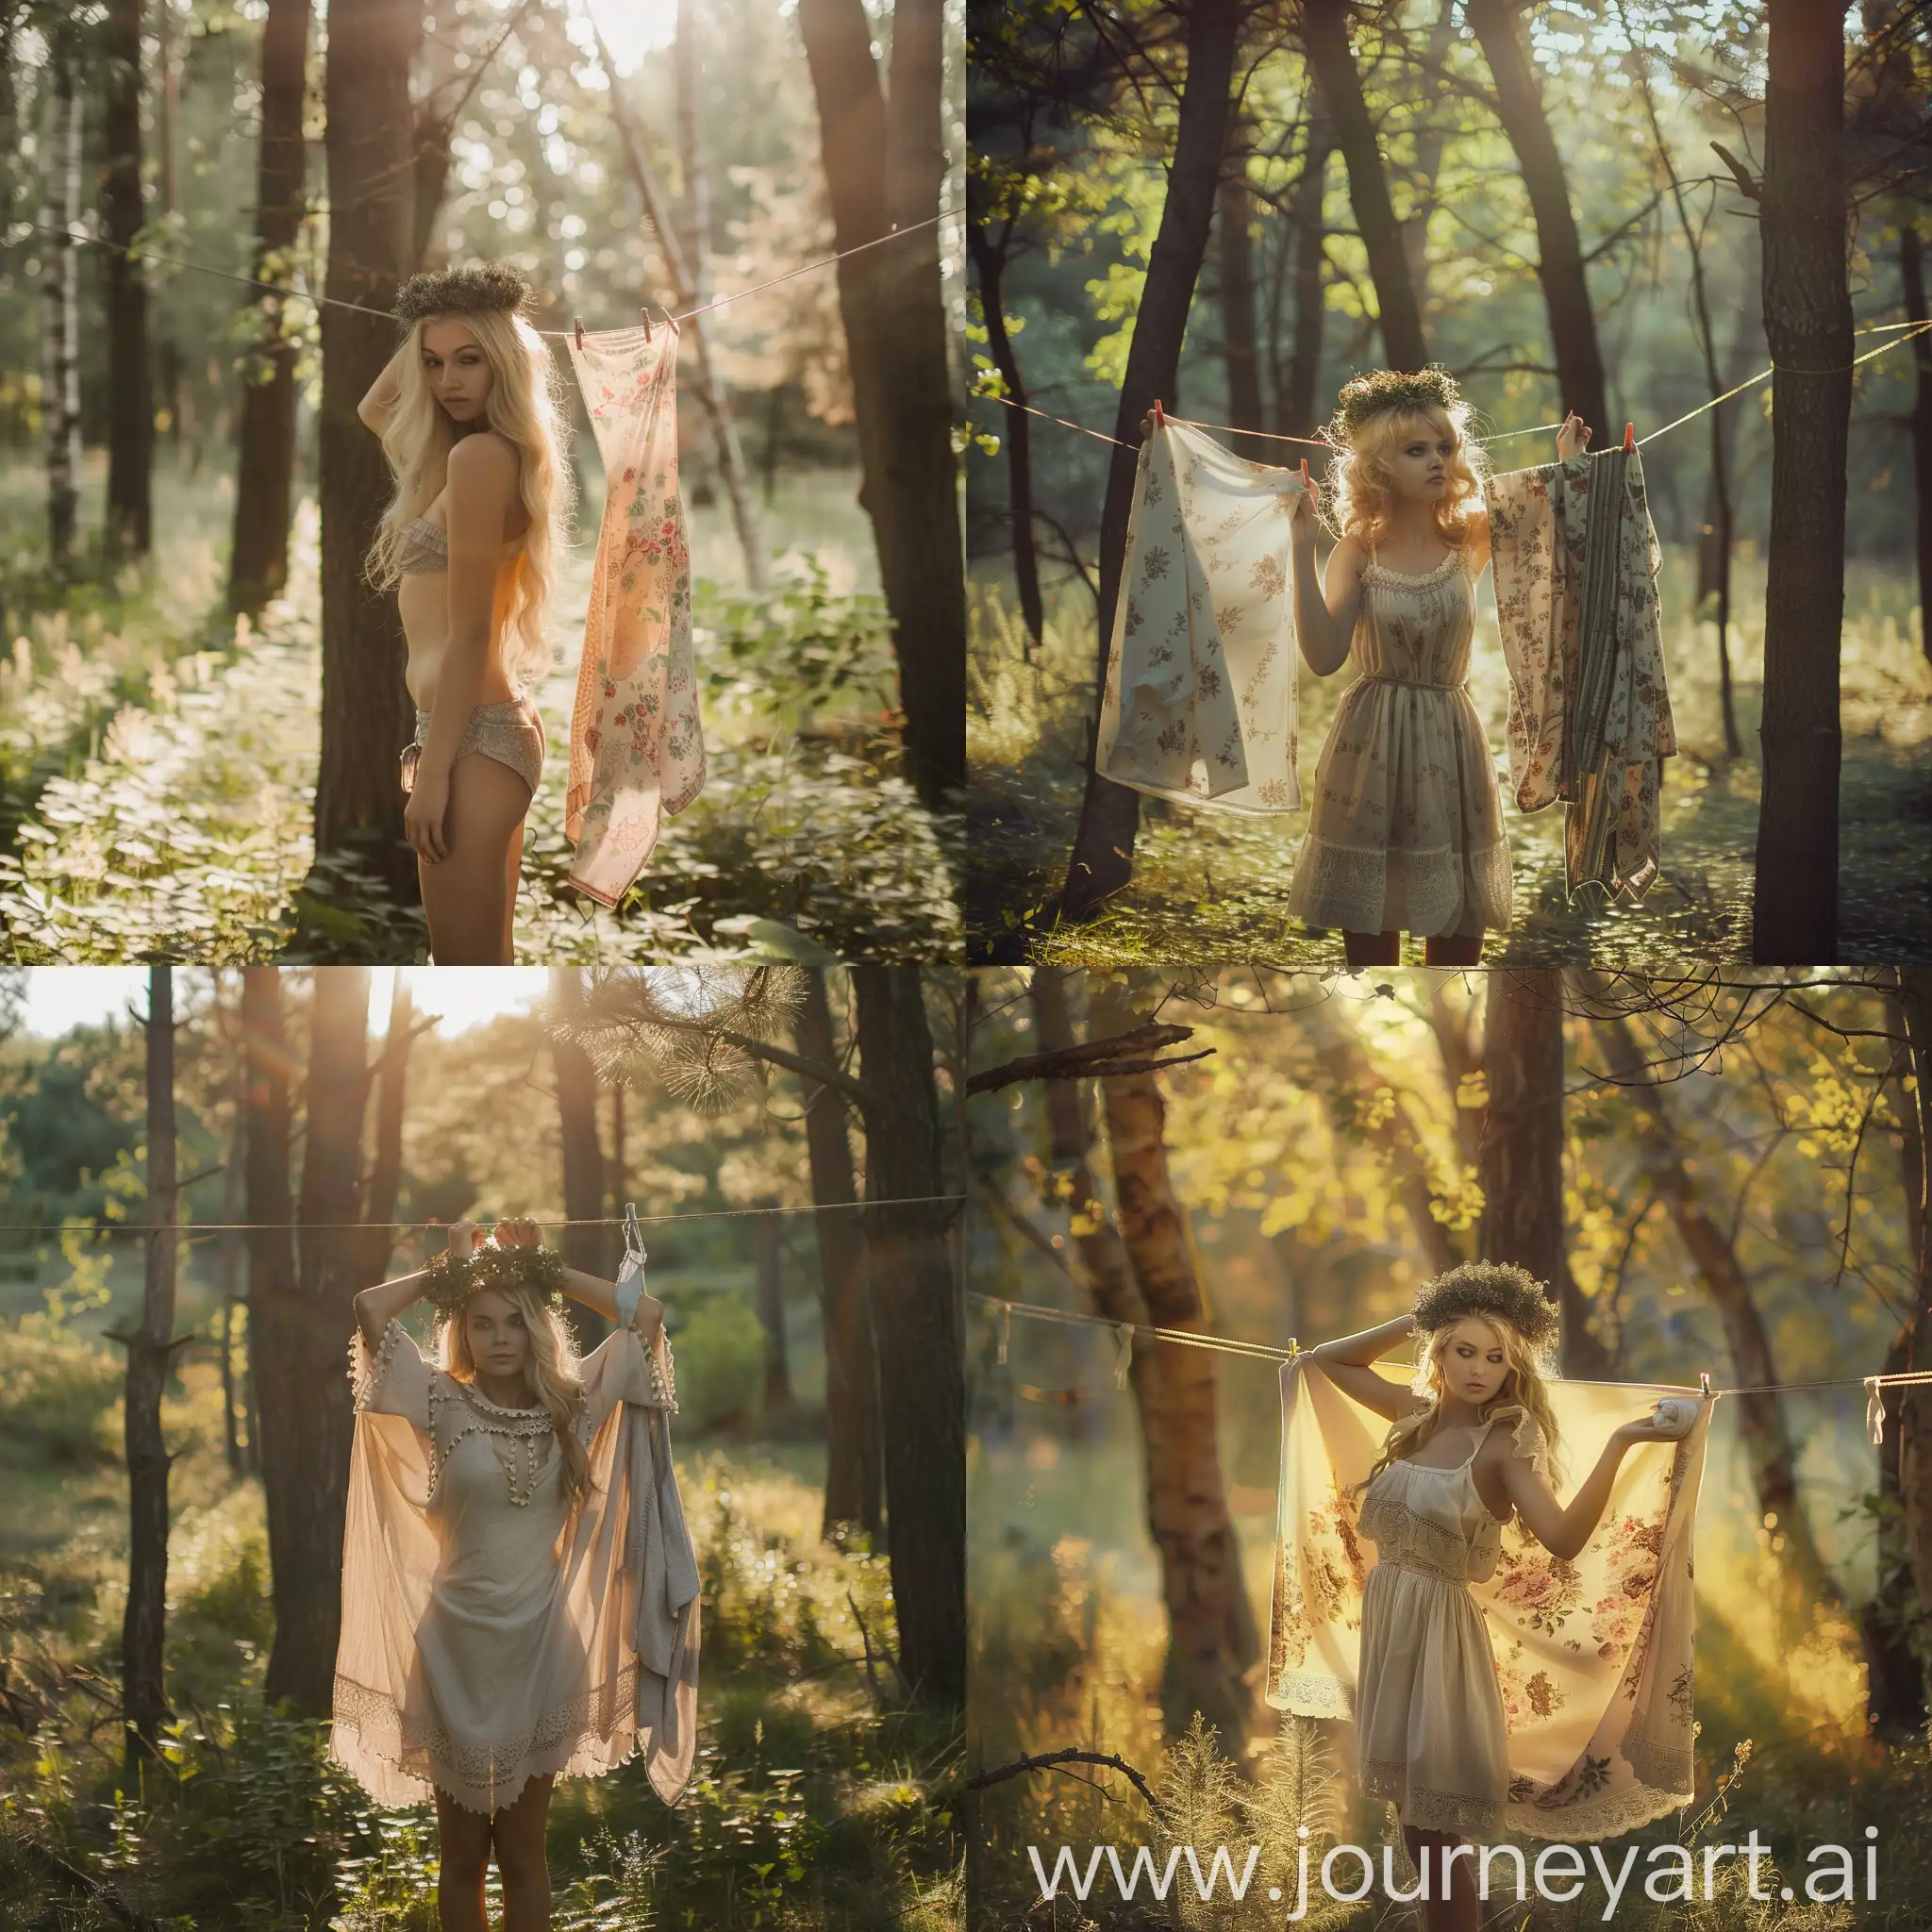 natural photo of a woman hanging laundry, forest, meadow, laundry line hanging between trees, warm sunlight, vintage woman's clothes, blonde, wearing a wreath on her head natural photo